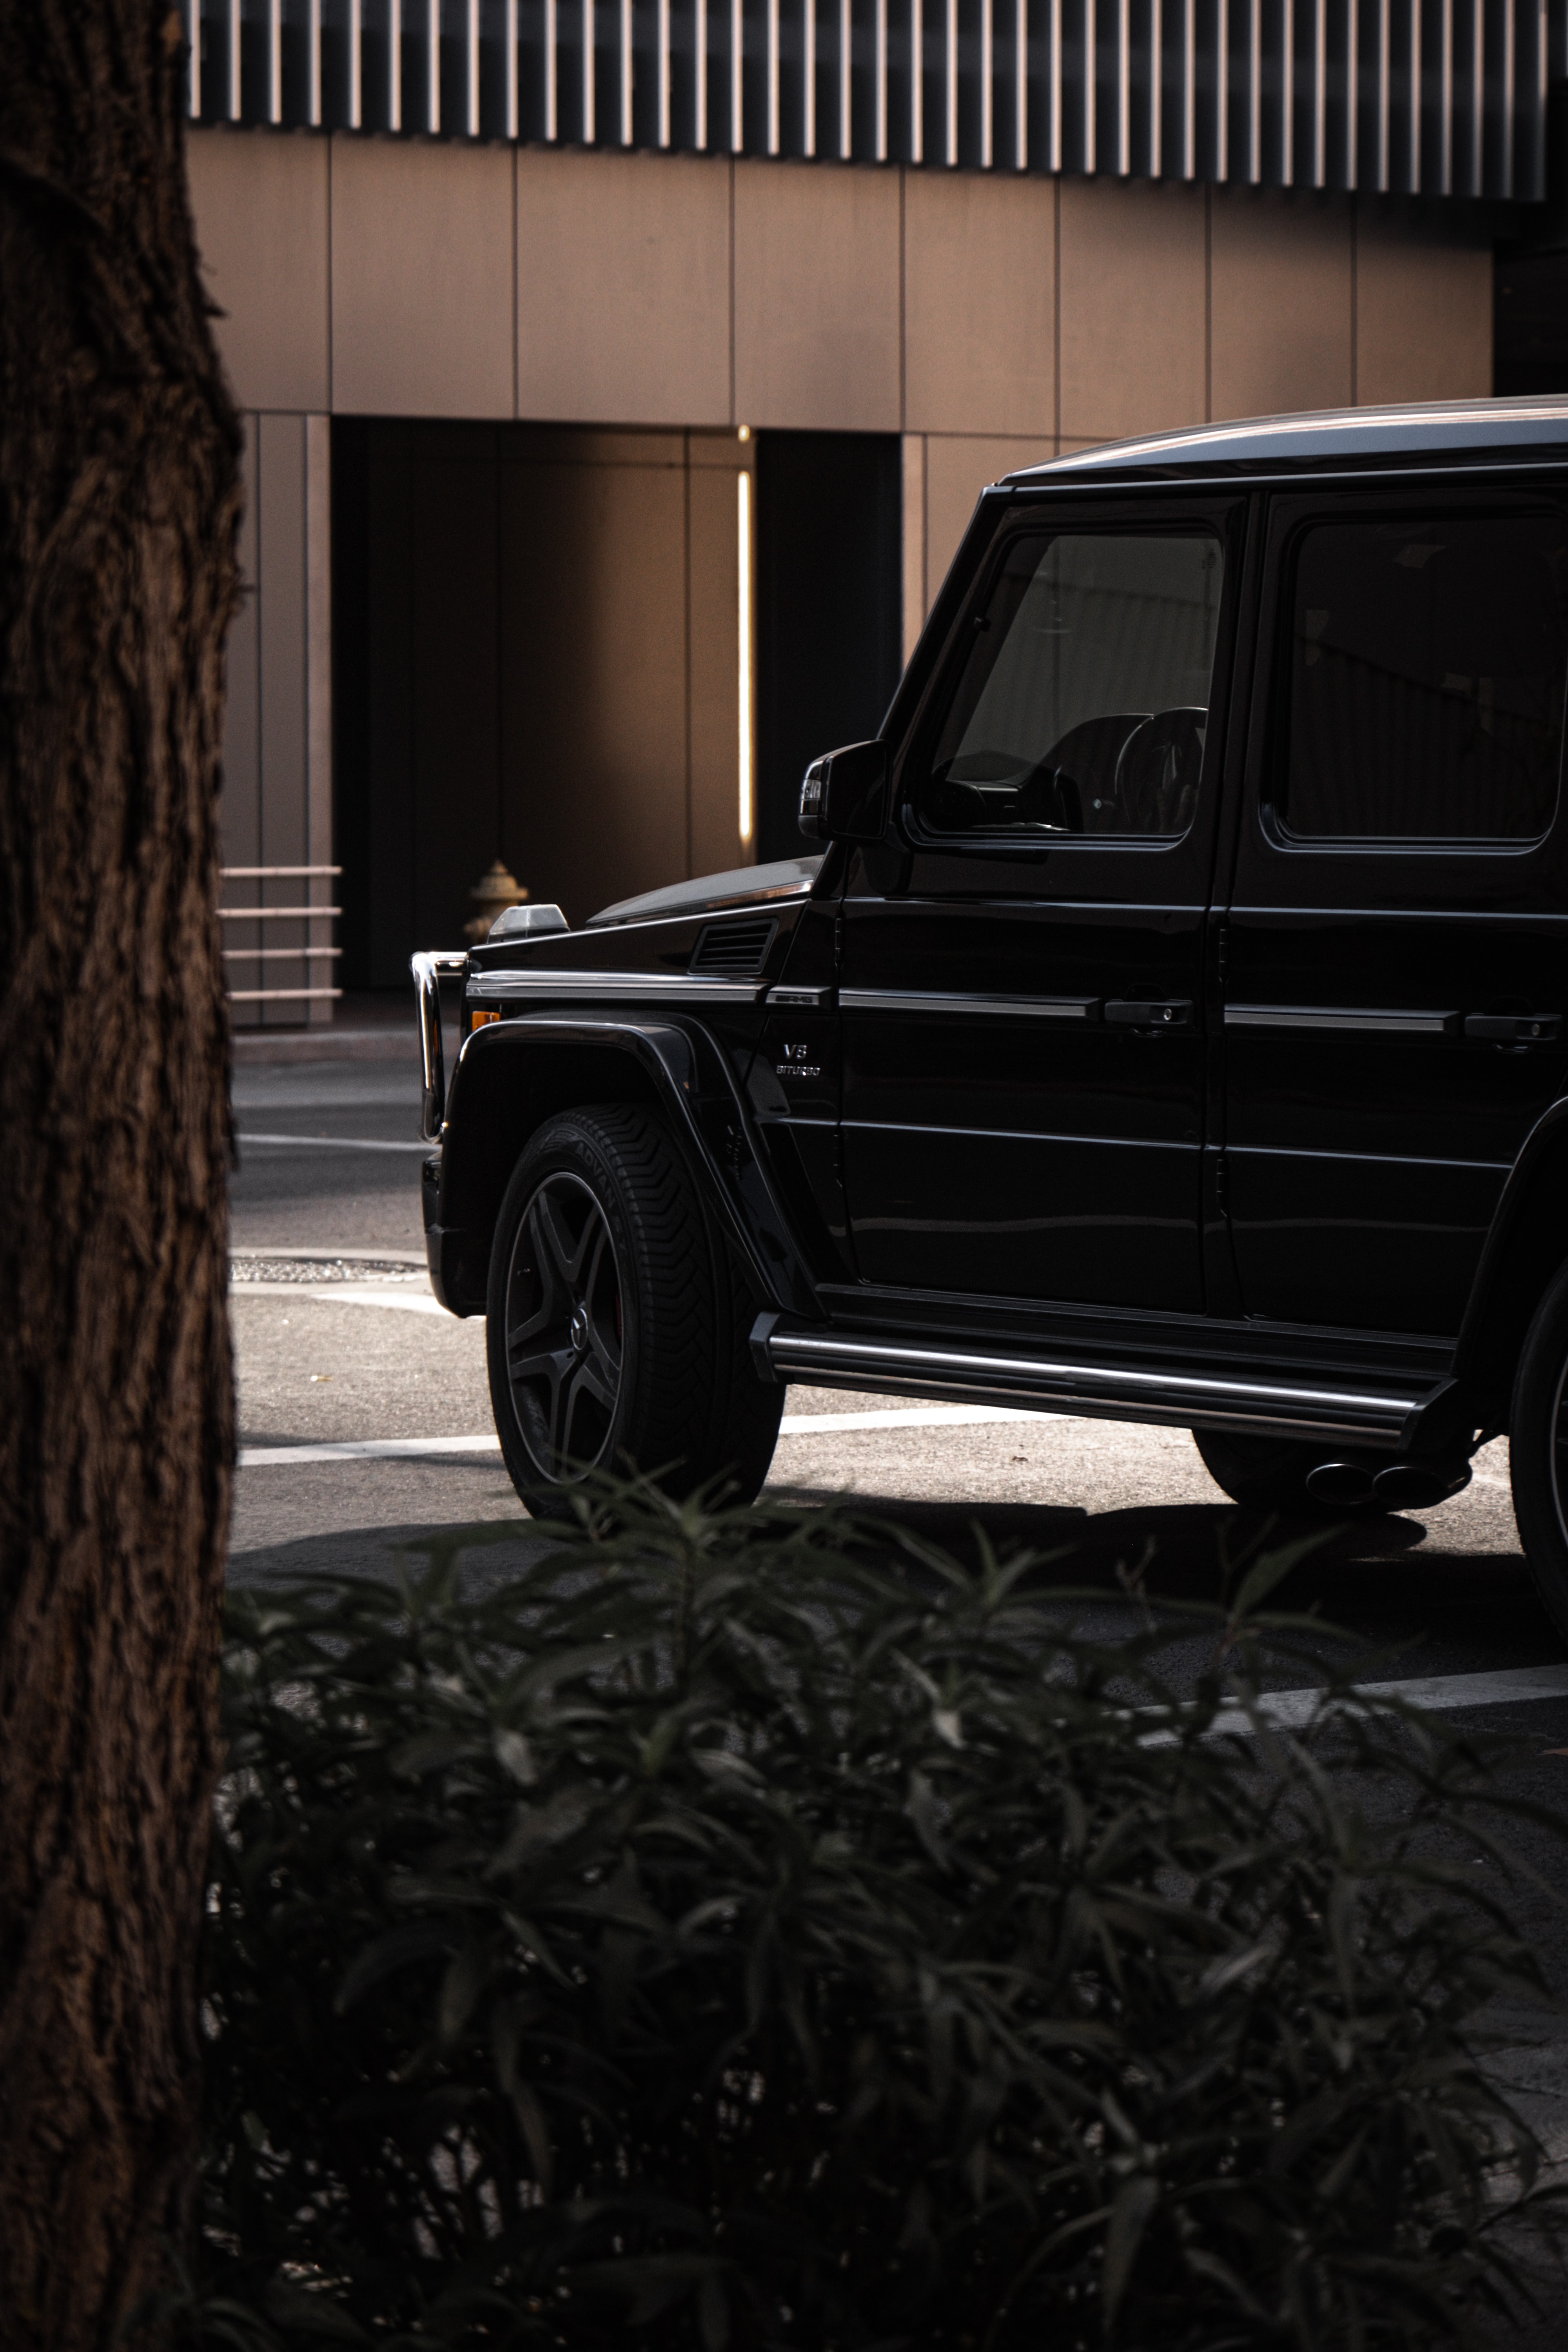 suv, mercedes, cars, black, car, side view wallpaper for mobile